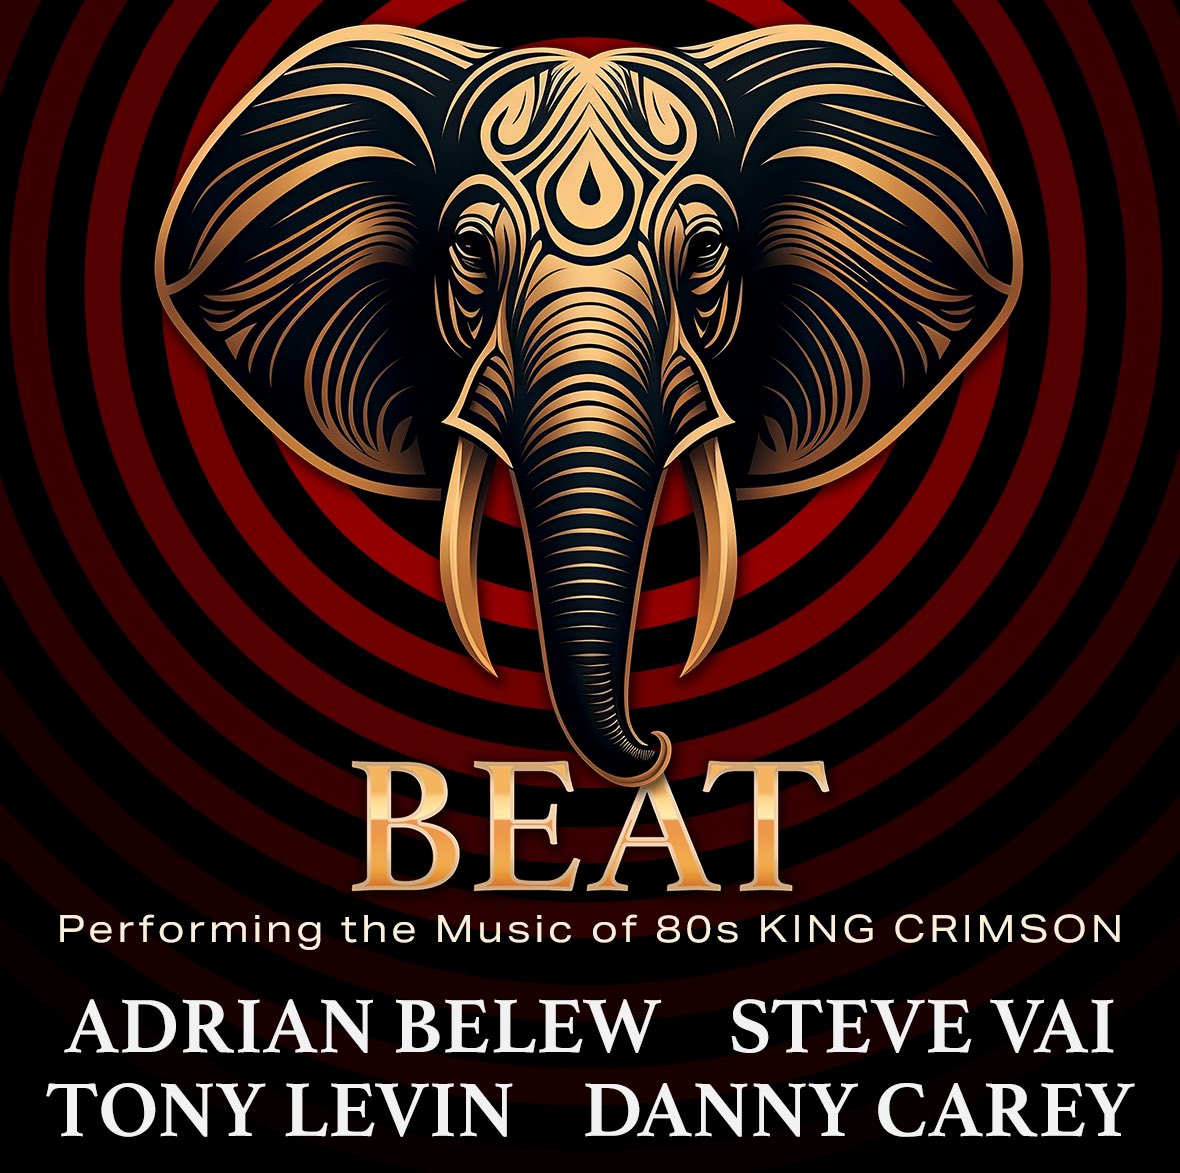 An update re tour datres and advance ticket sales for the Beat Tour : the tour website, beat-tour.com is has the tour schedule, and Down Below them, a second list of shows with links to get advance tickets. For that you’ll need the password: BEATTOUR #kingcrimson